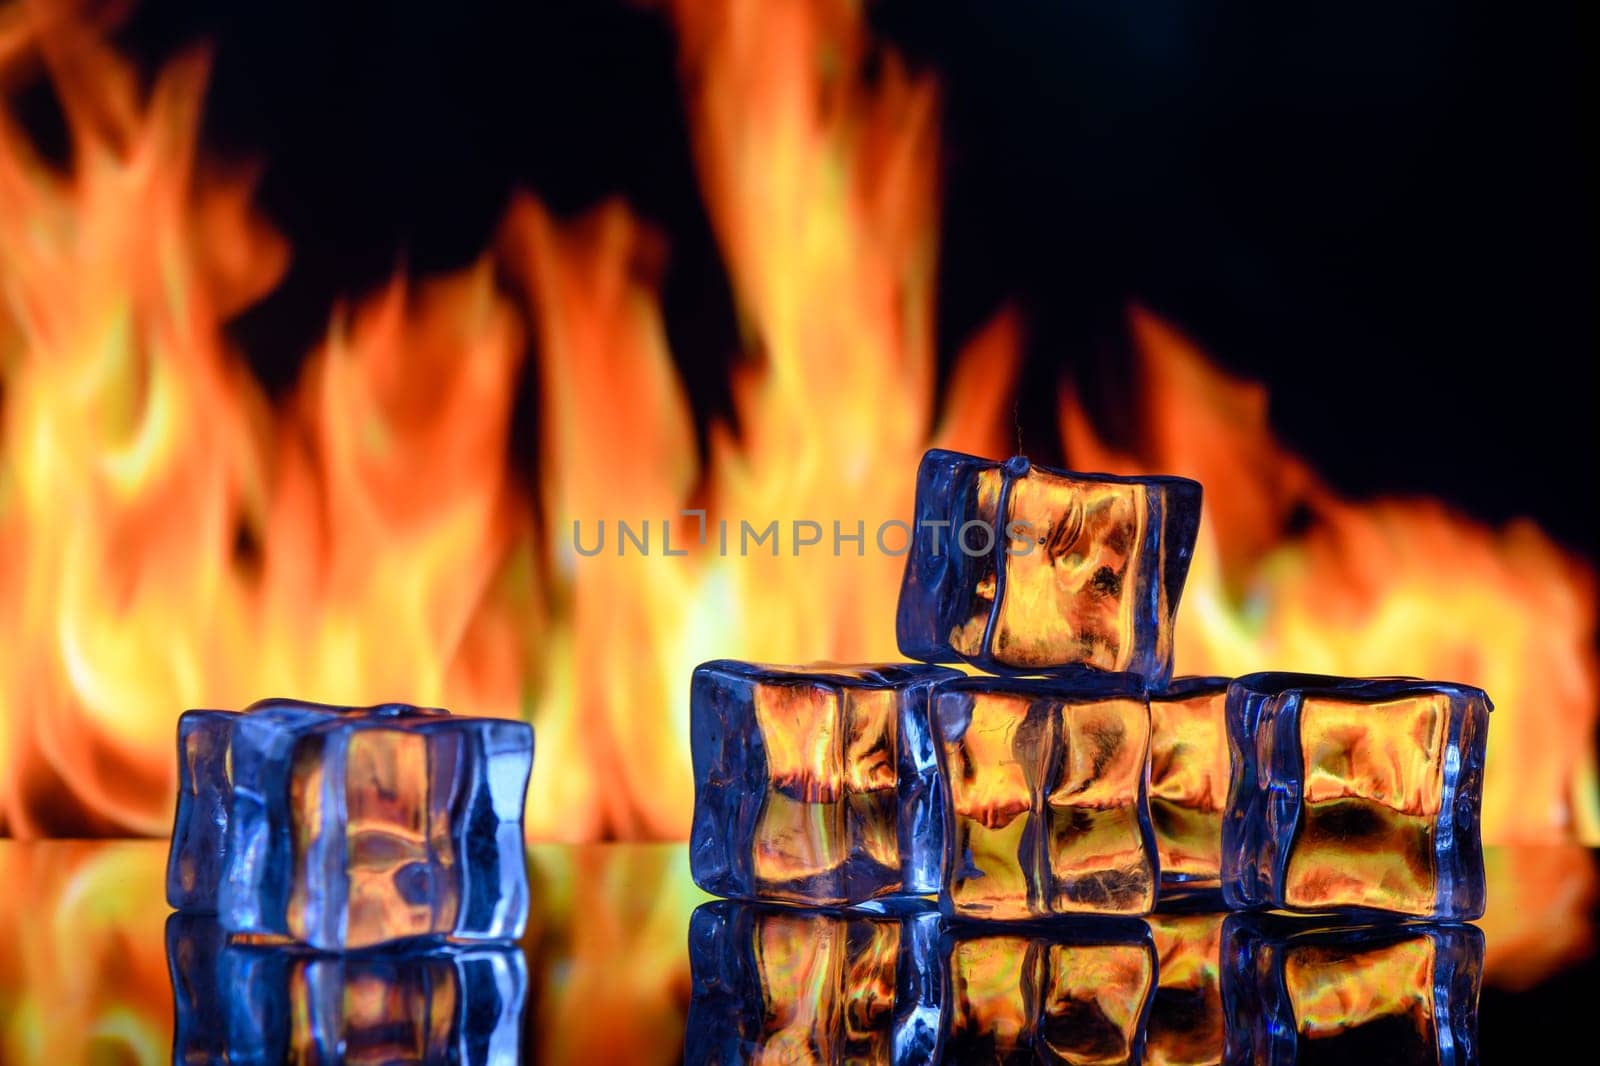 ice cubes on a black background in flames 1 by Mixa74